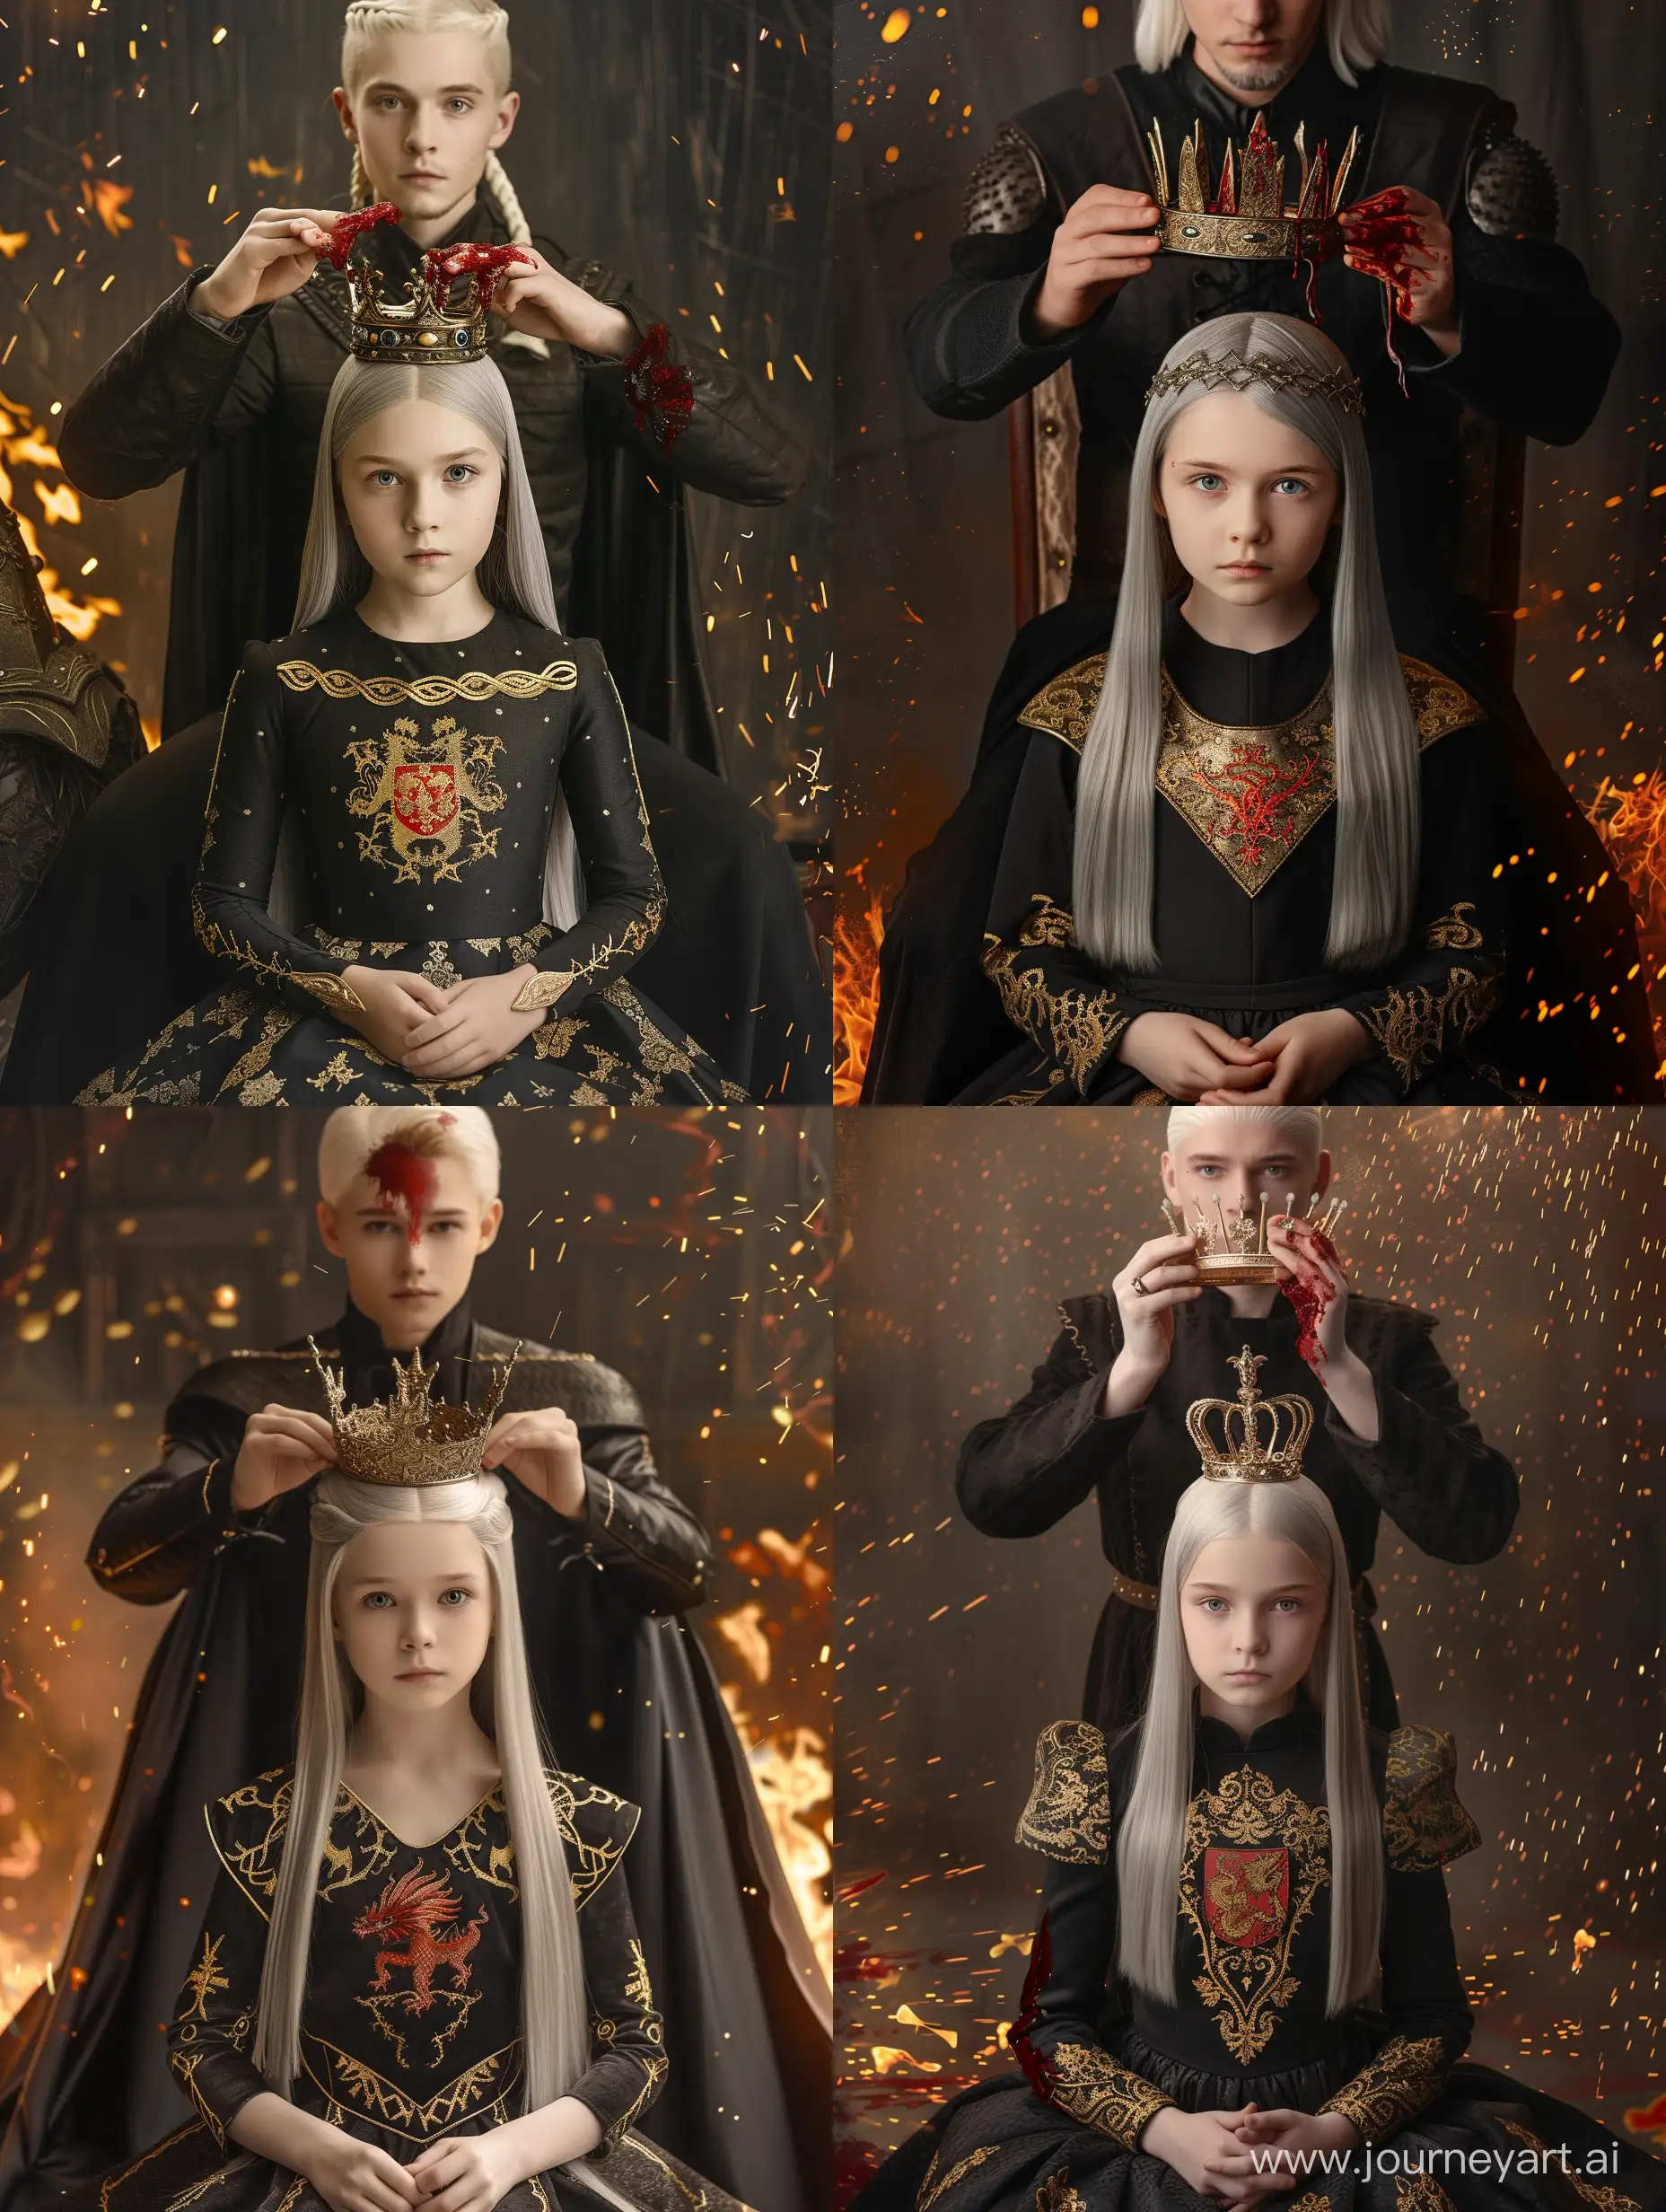 A young girl with straight white hair and gray eyes in a black dress with gold patterns on the chest, sleeves and shoulders, open neckline, sits with clasped hands, behind her stands a tall man with white hair just below the shoulders in a black medieval costume with the coat of arms of a red dragon on his chest, he holds a crown over the girl's head, with a crown blood flows, fire and flaming sparks on the background, Game of Thrones style, cinematic style, dark golden light